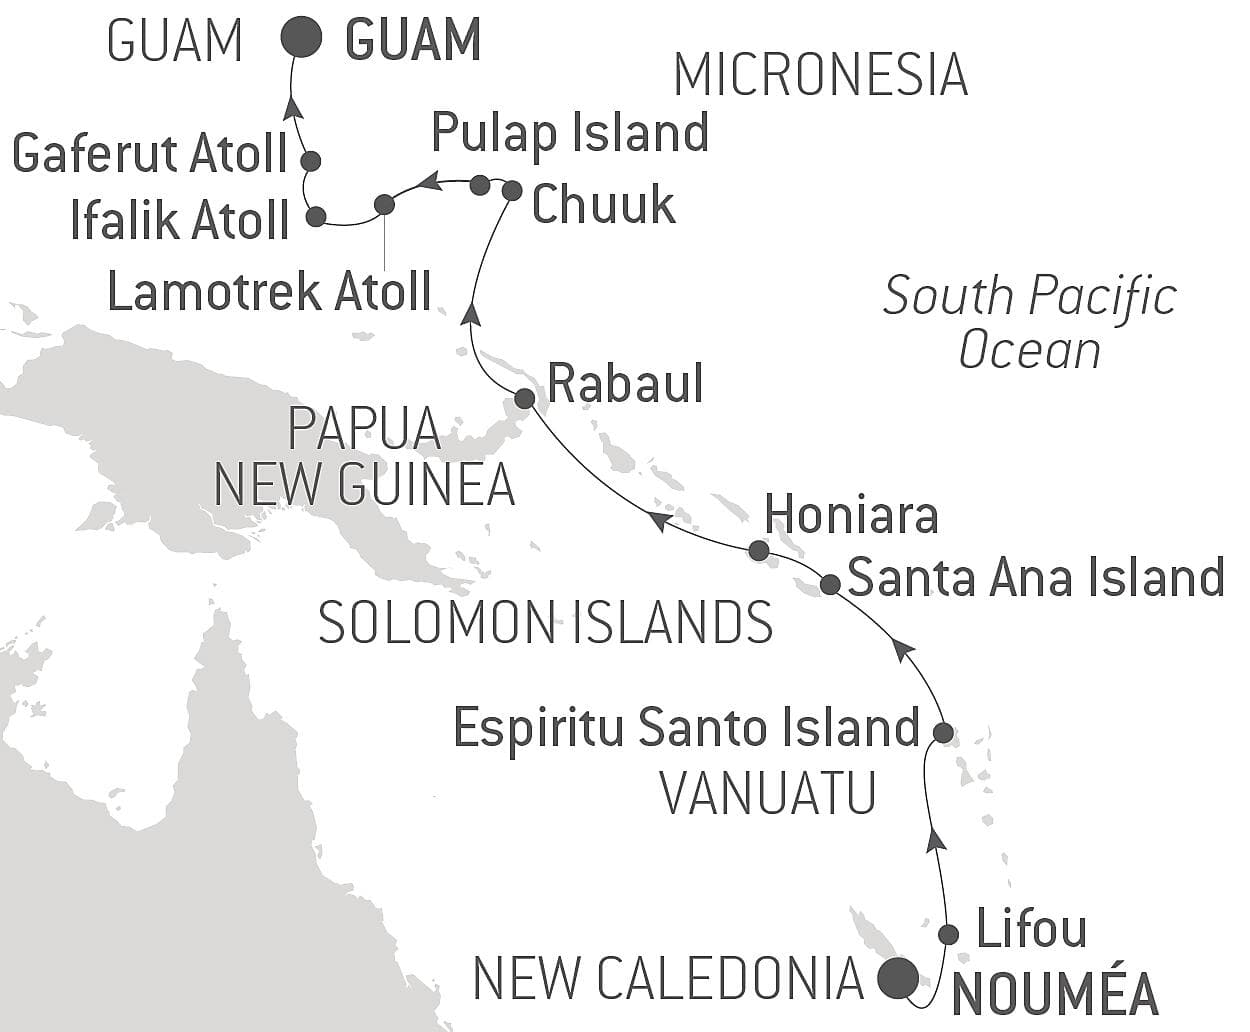 From New Caledonia to Micronesia